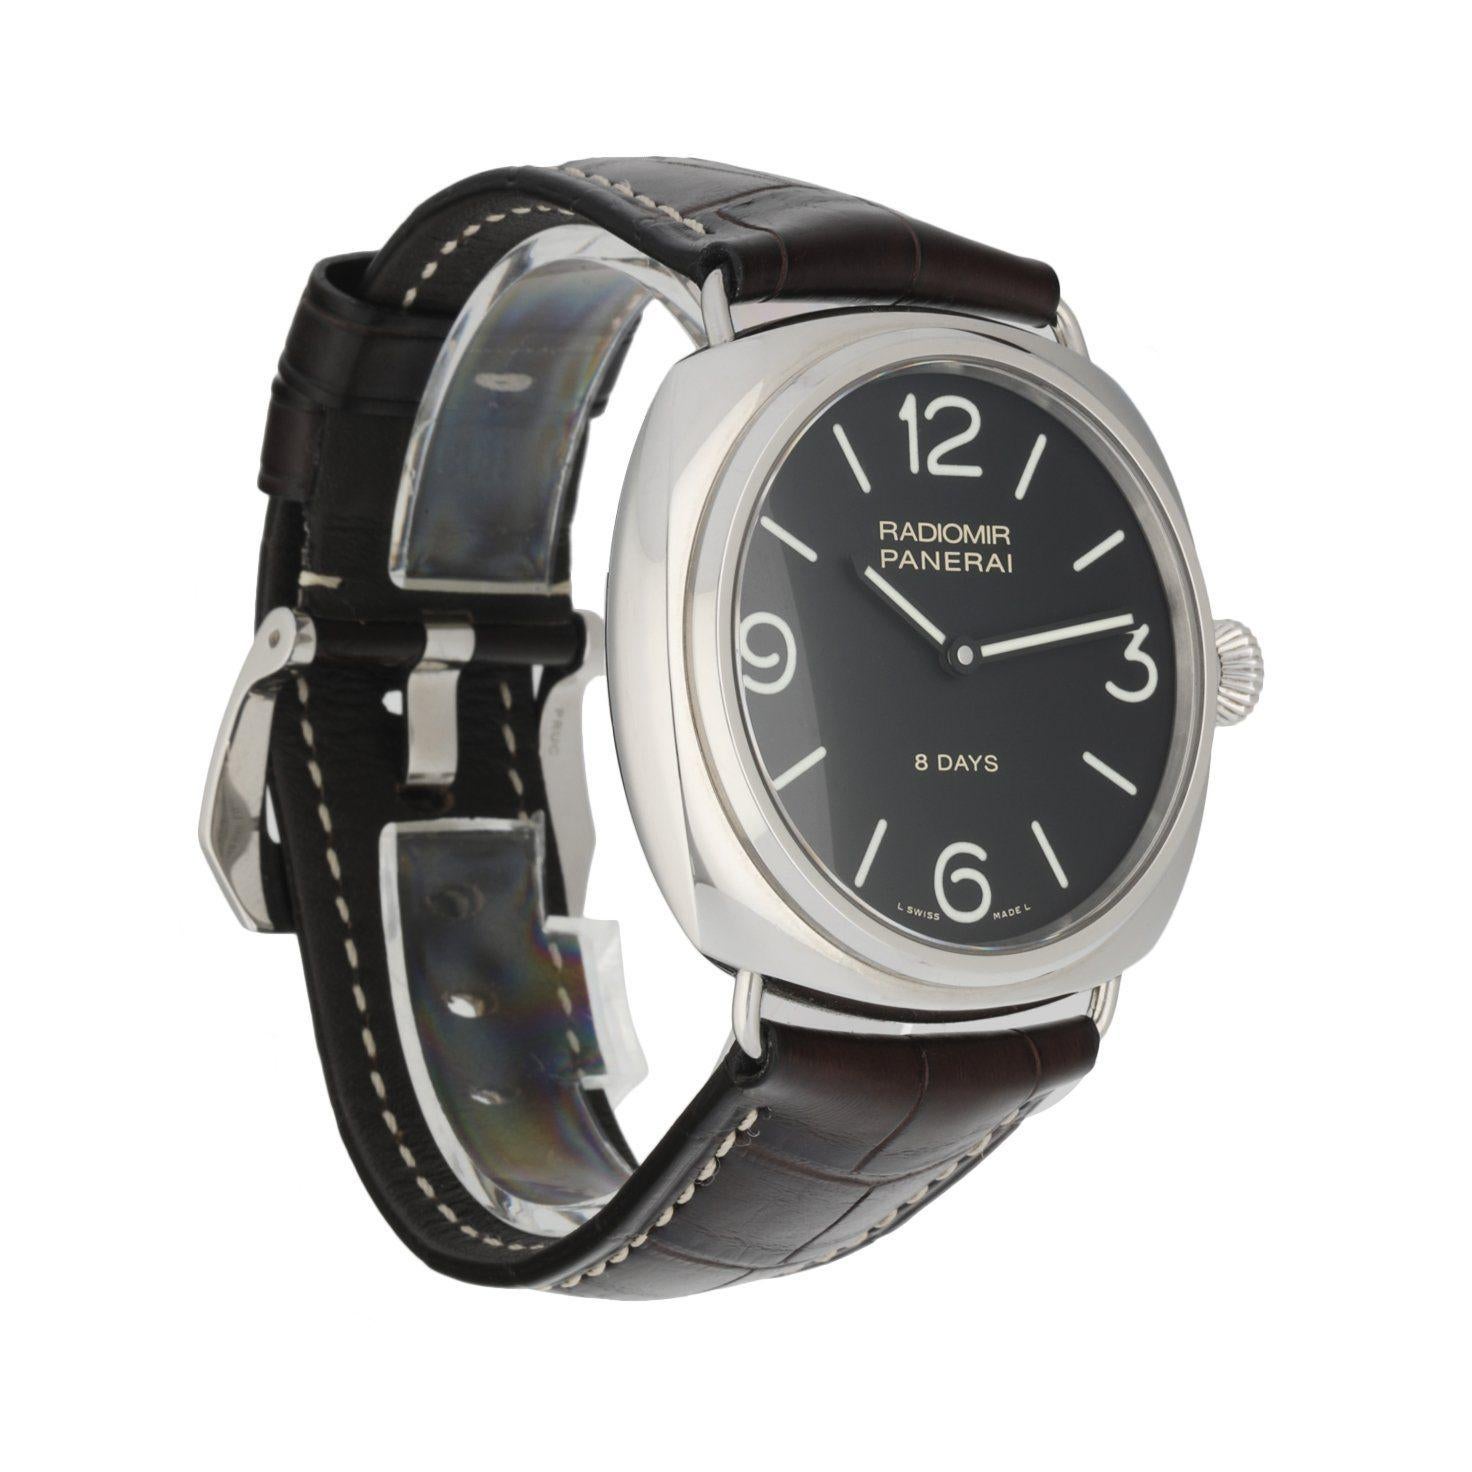 Panerai Radiomir 8 Days Pam00610 men's watch. 45MM stainless steel case with smooth bezel. Black dial with luminous hands and Arabic numeral & Index hour marker. Brown leather with stainless steel buckle. Will fit up to 8-Inch wrist. Sapphire